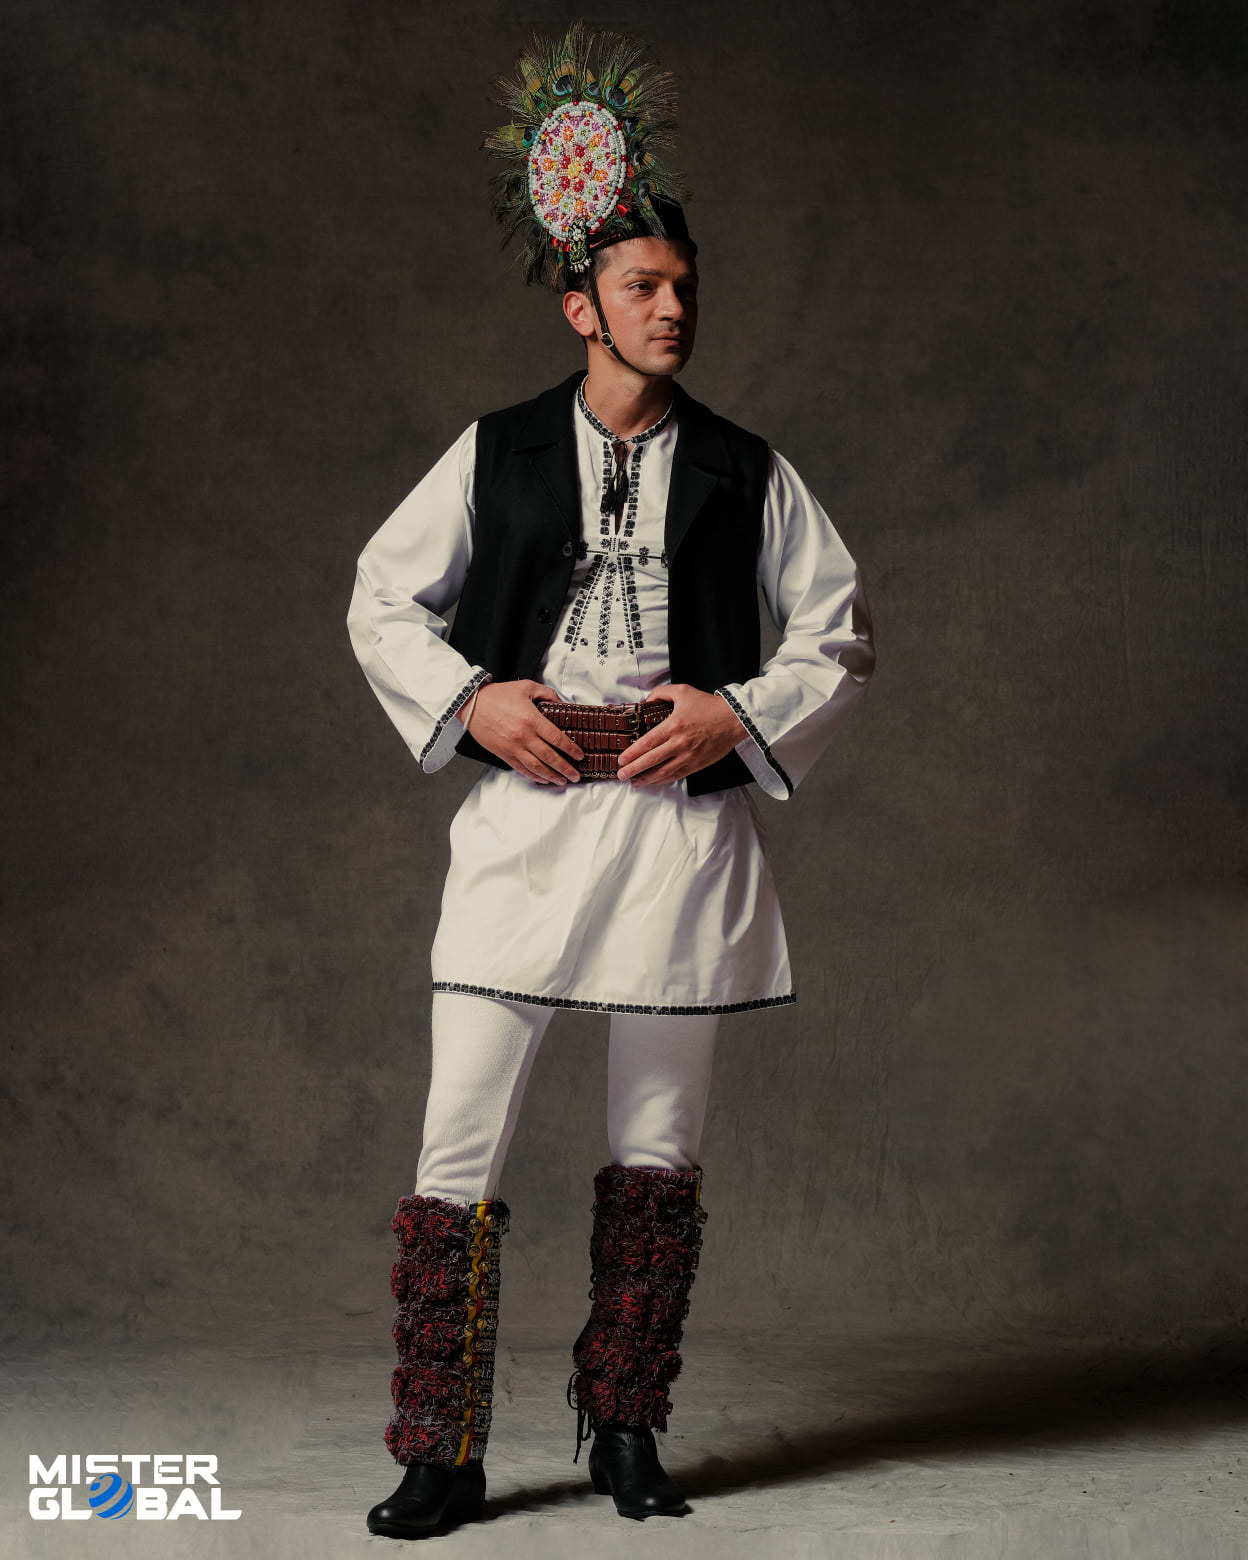 A man with a long shirt with a thick belt, vest, and headdress